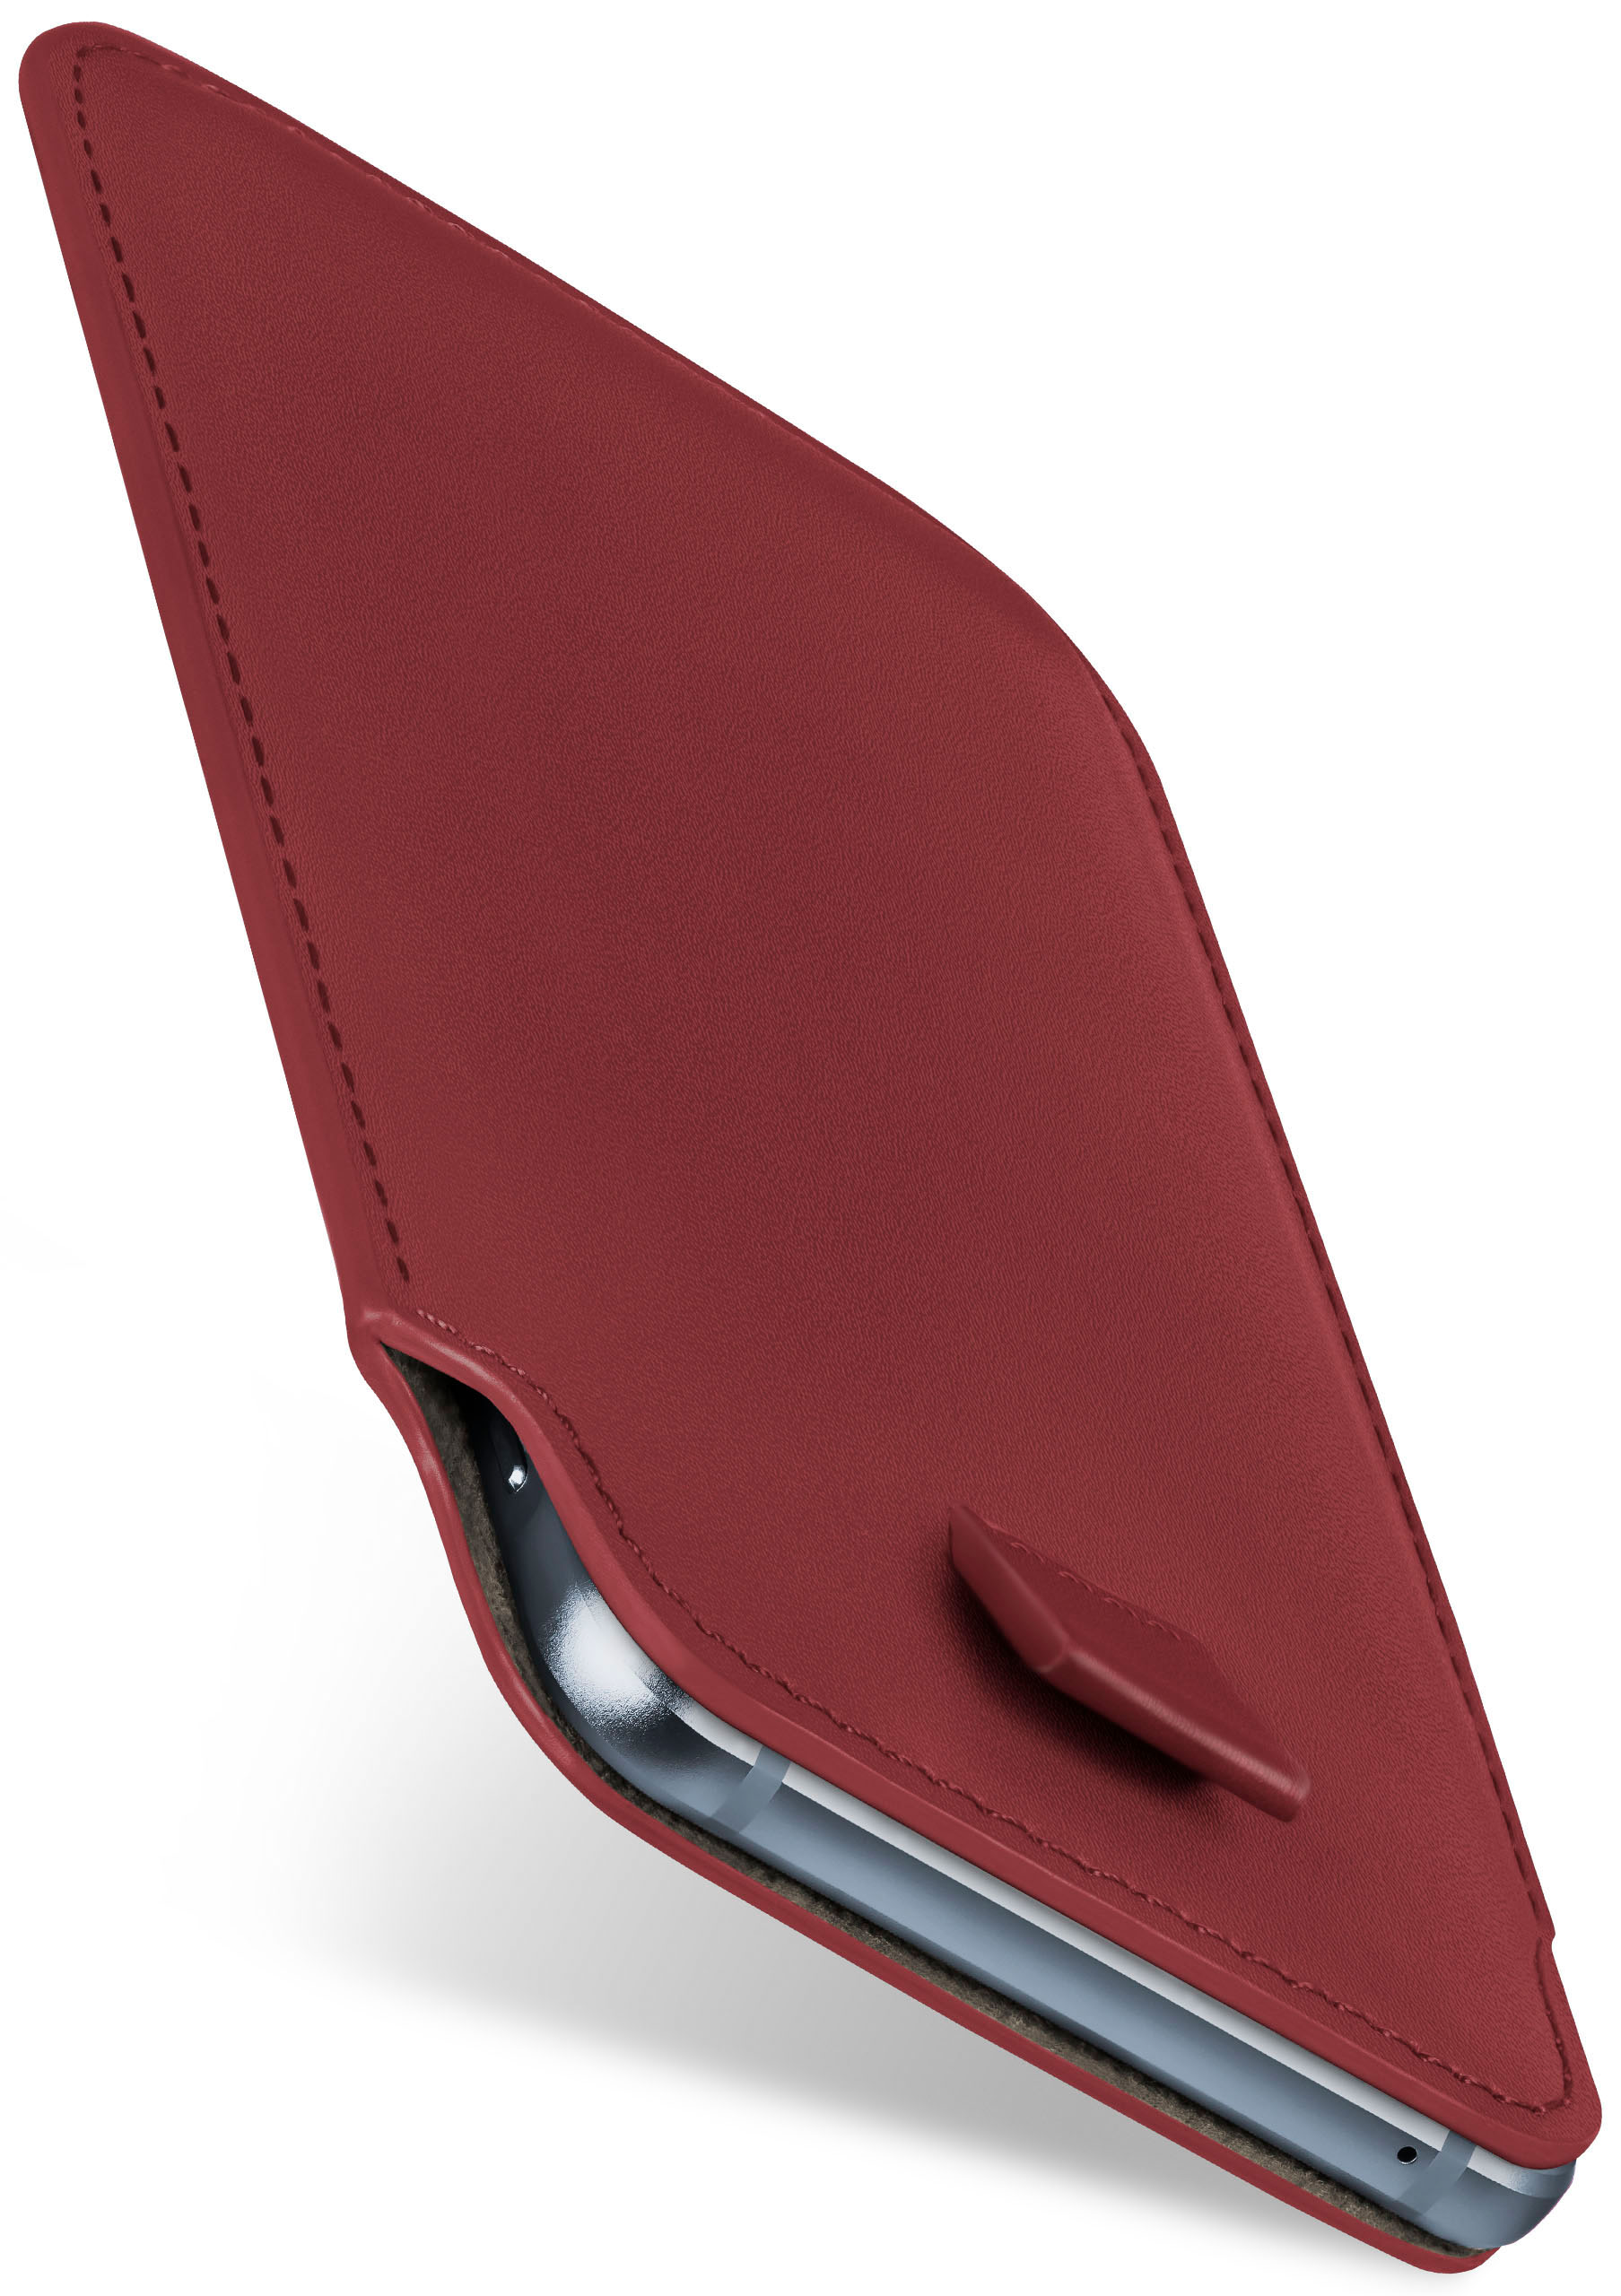 Lumia MOEX 635, / Case, 630 Maroon-Red Nokia, Slide Cover, Full